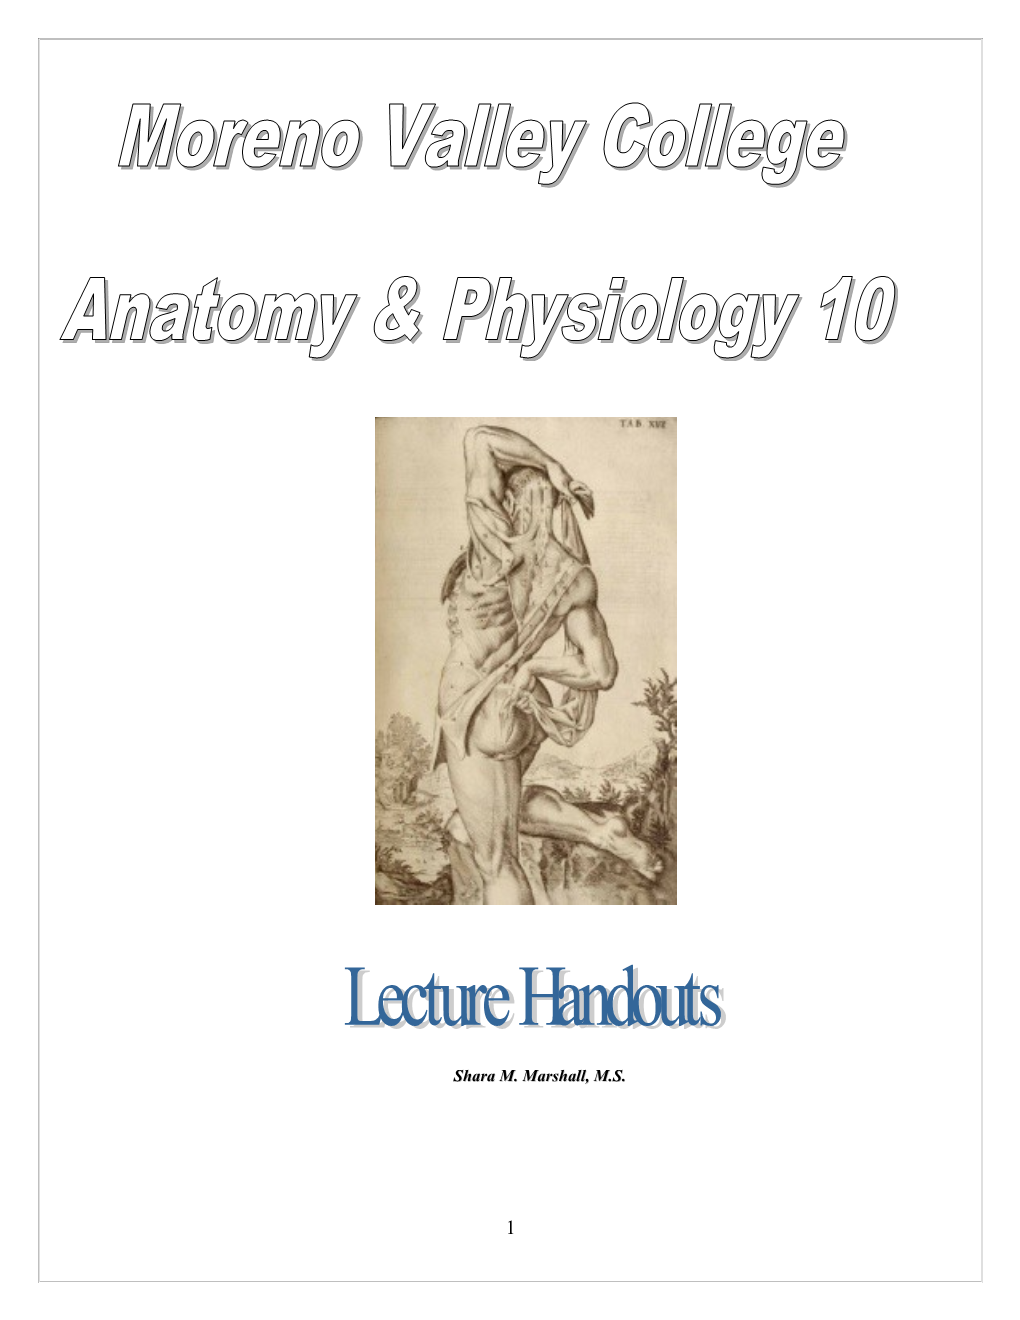 Anatomical Regions, Positions and Terminology